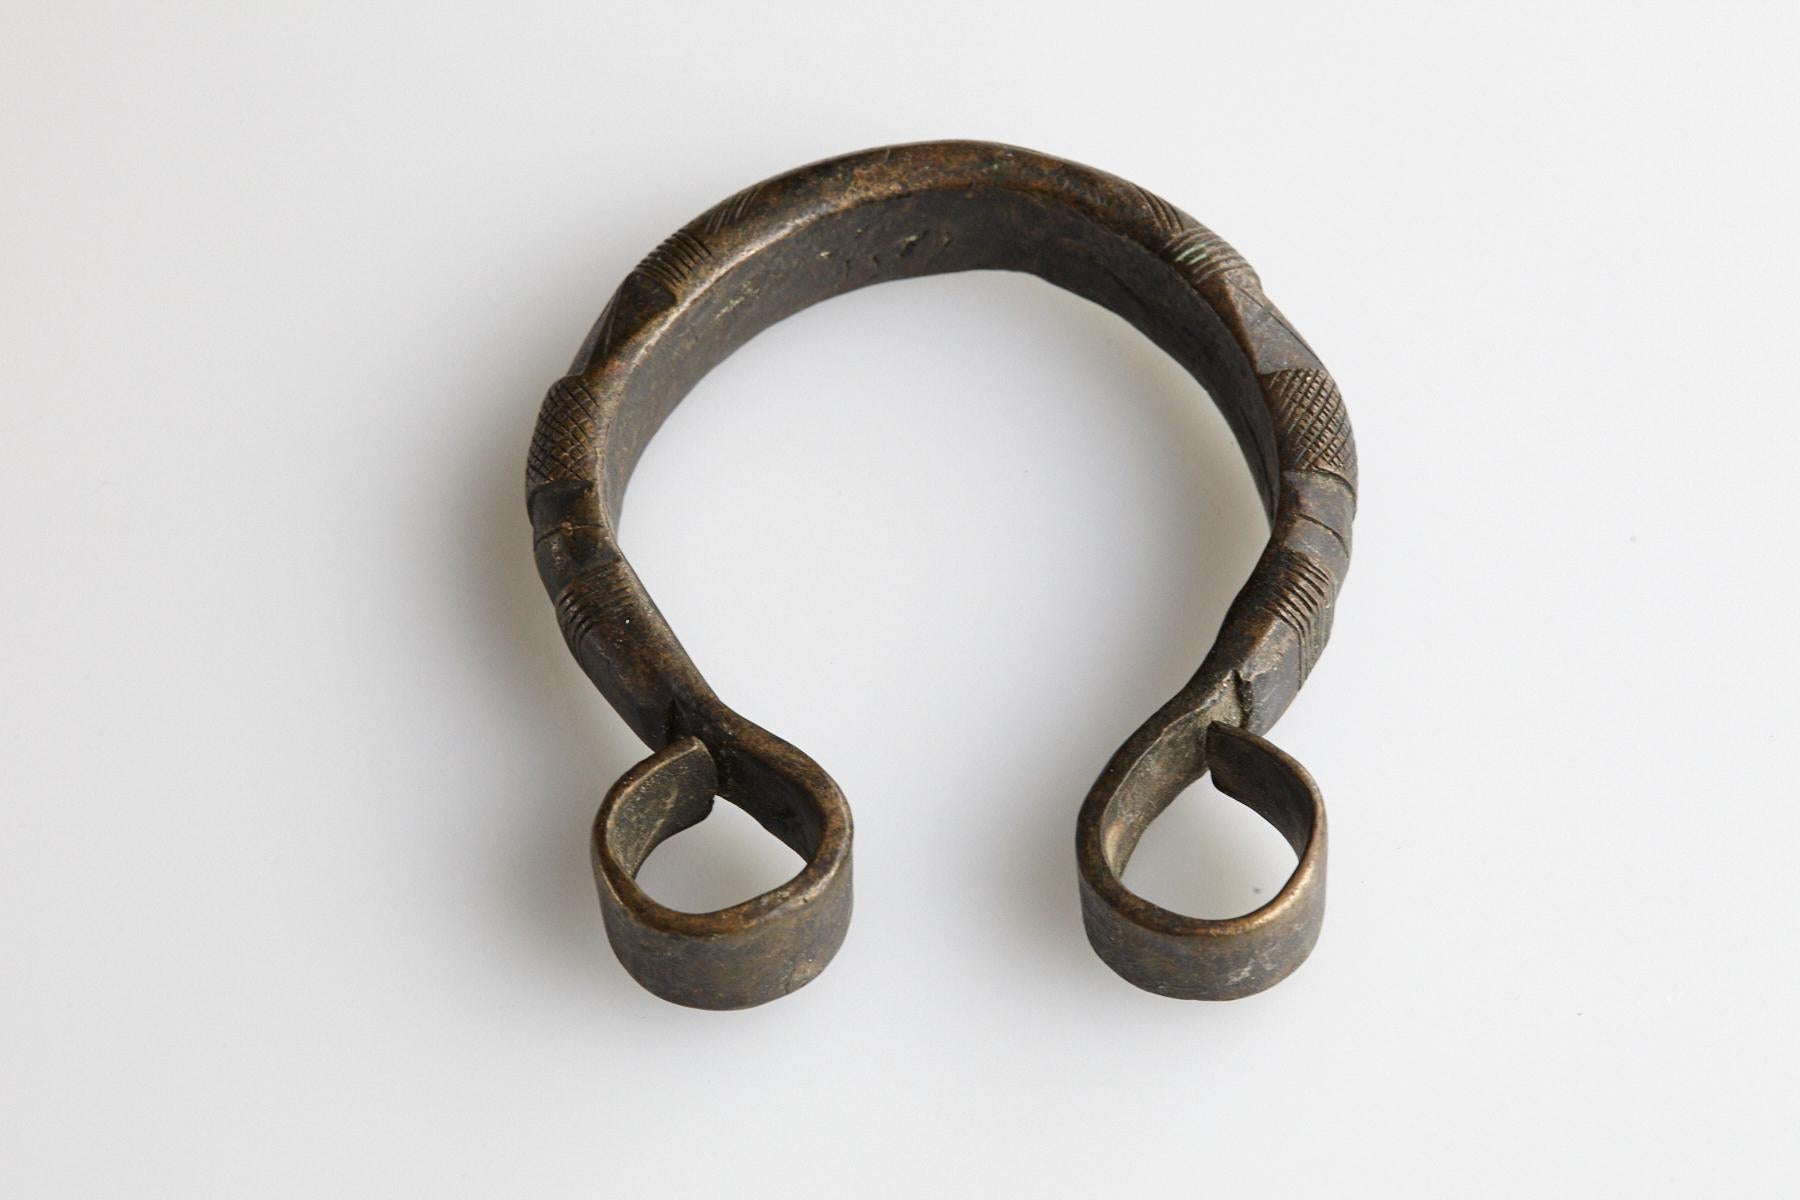 Burkinabe Solid Brass Currency Bracelet/Manilla, Gurma People, Burkina Faso, Early 20th C For Sale